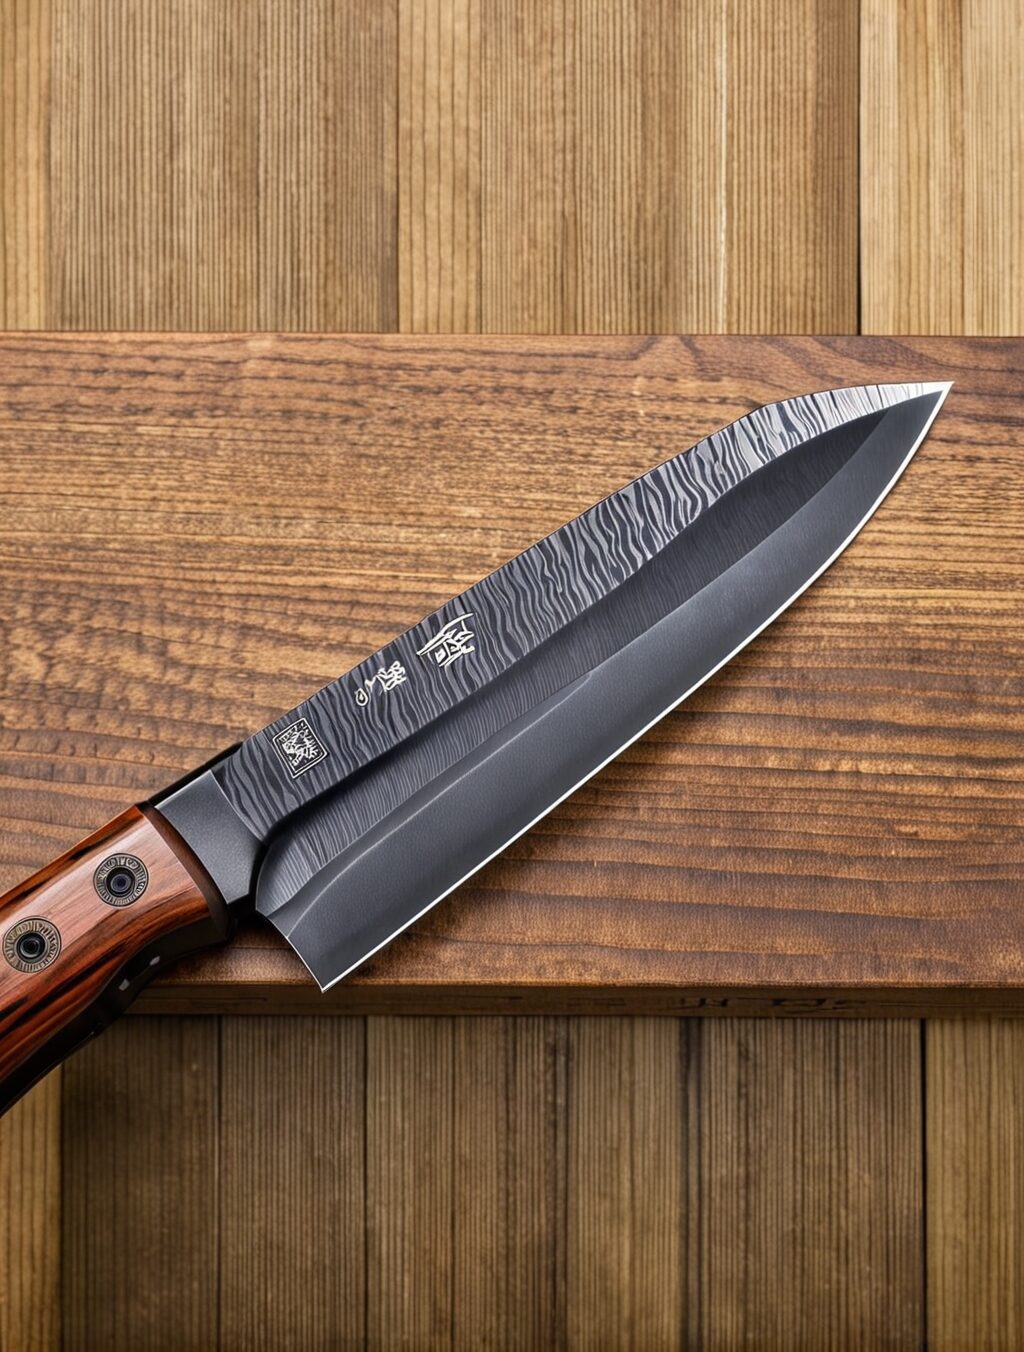 where to buy knives in japan